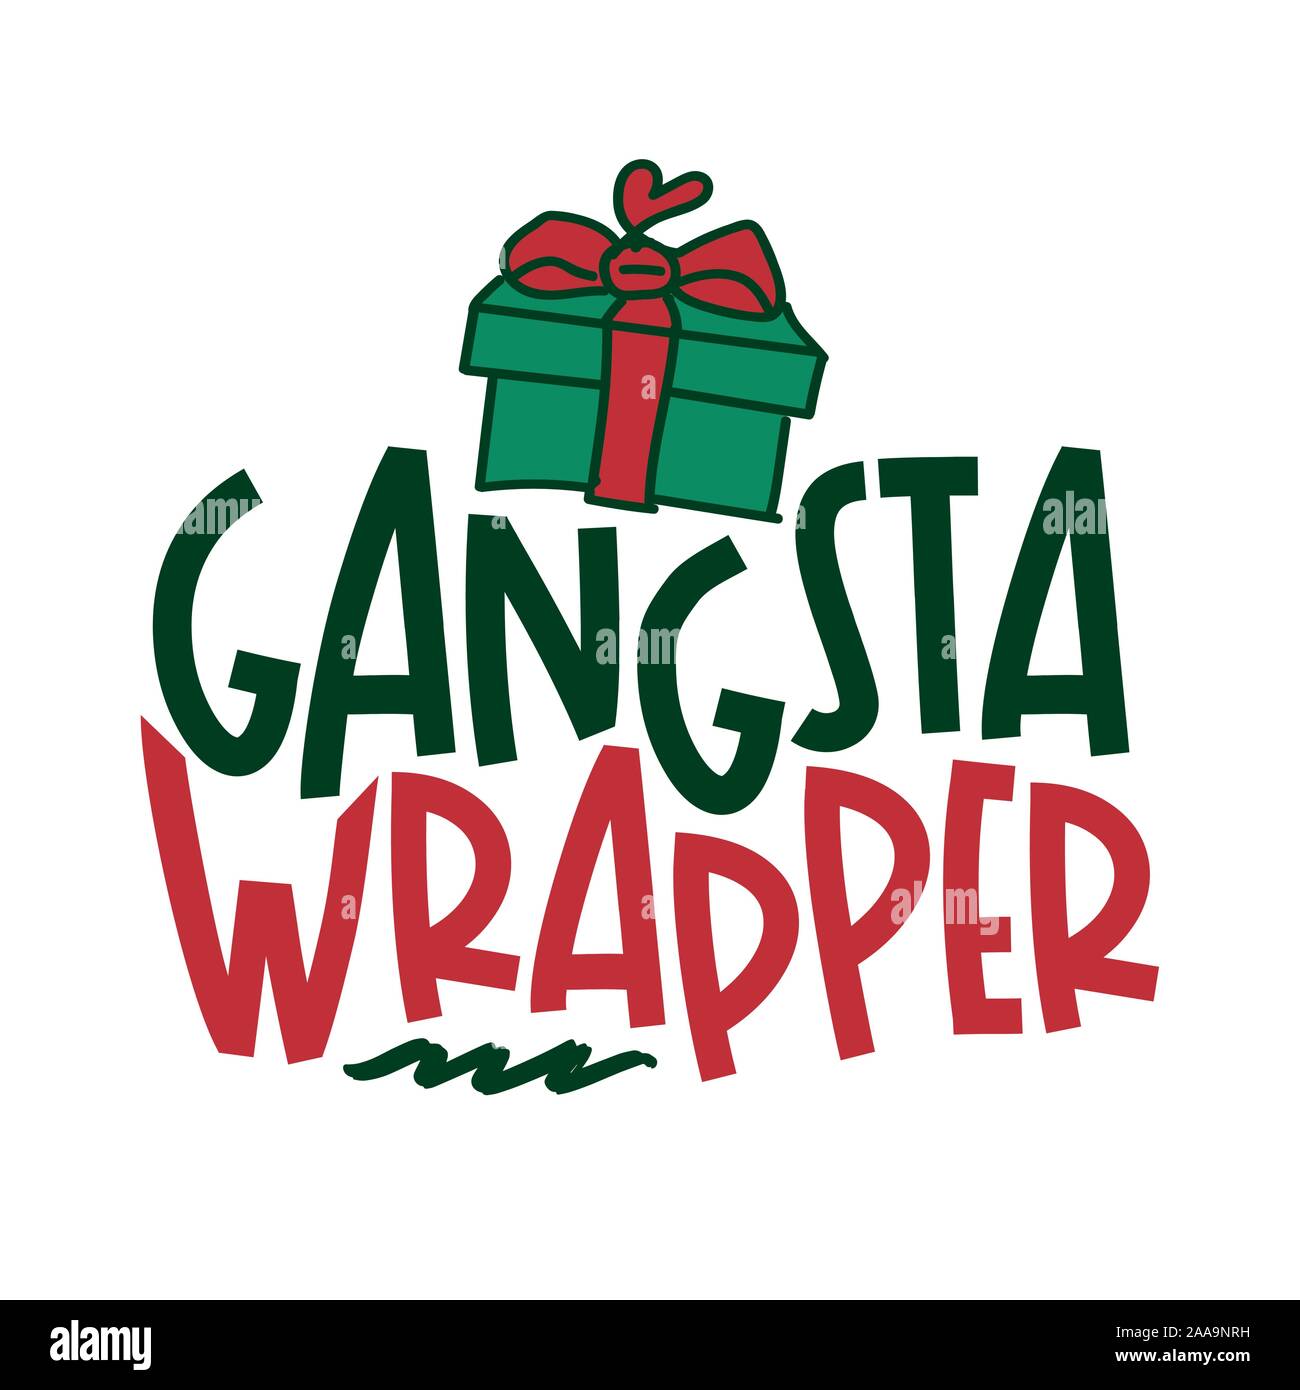 Grangsta Wrapper - Calligraphy phrase for Christmas. Hand drawn lettering for Xmas greetings cards, invitations. Good for t-shirt, mug, scrap booking, Stock Vector